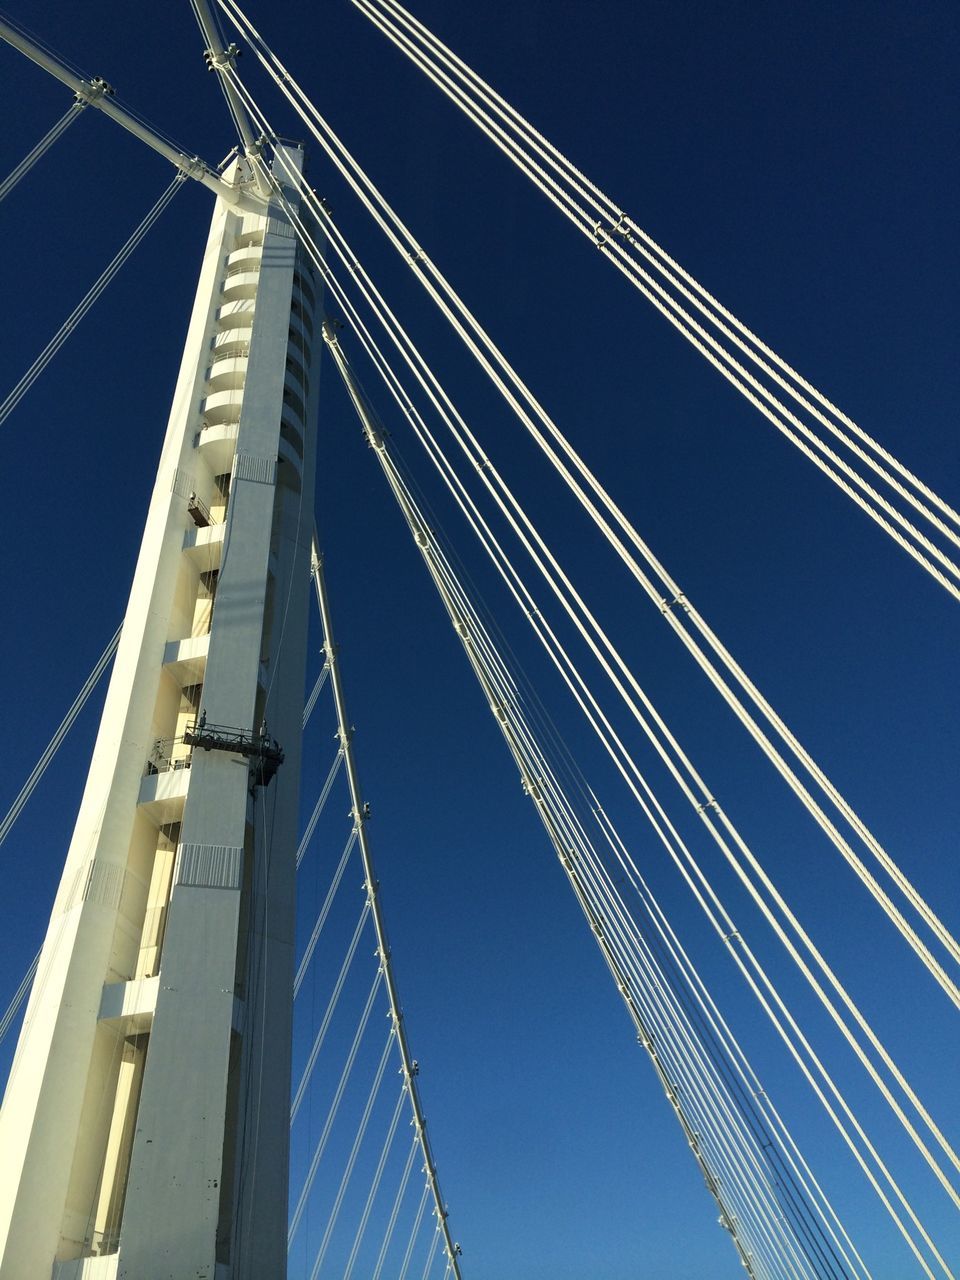 connection, low angle view, bridge - man made structure, engineering, suspension bridge, clear sky, transportation, blue, built structure, architecture, cable-stayed bridge, bridge, cable, copy space, steel cable, travel, outdoors, travel destinations, sky, no people